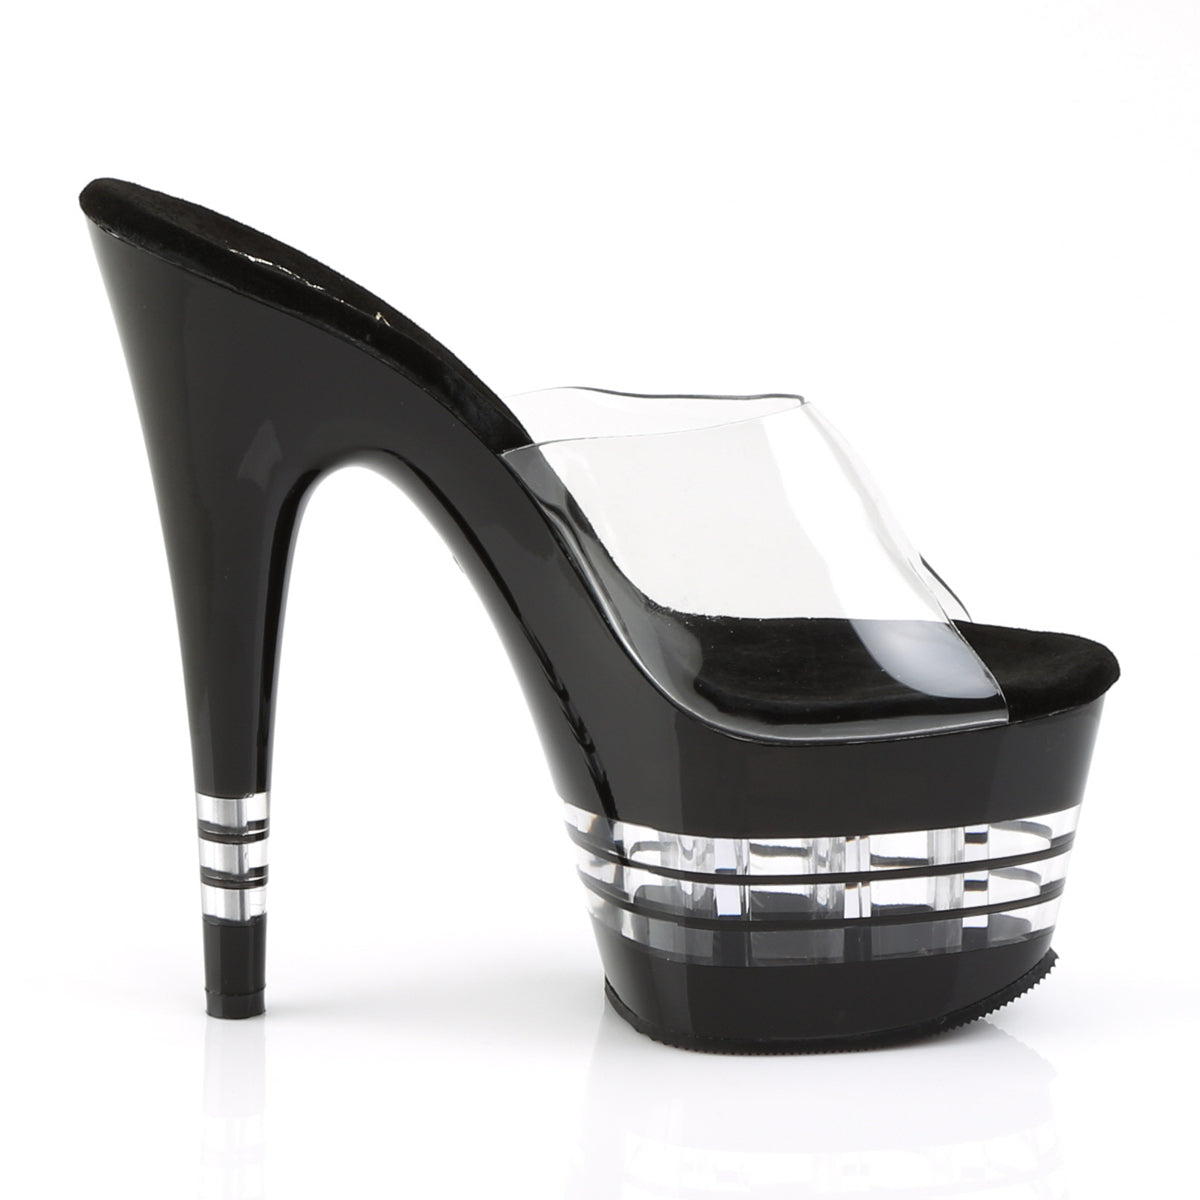 ADORE-701LN/C/B 7" PLEASER FAST DELIVERY 24-48h